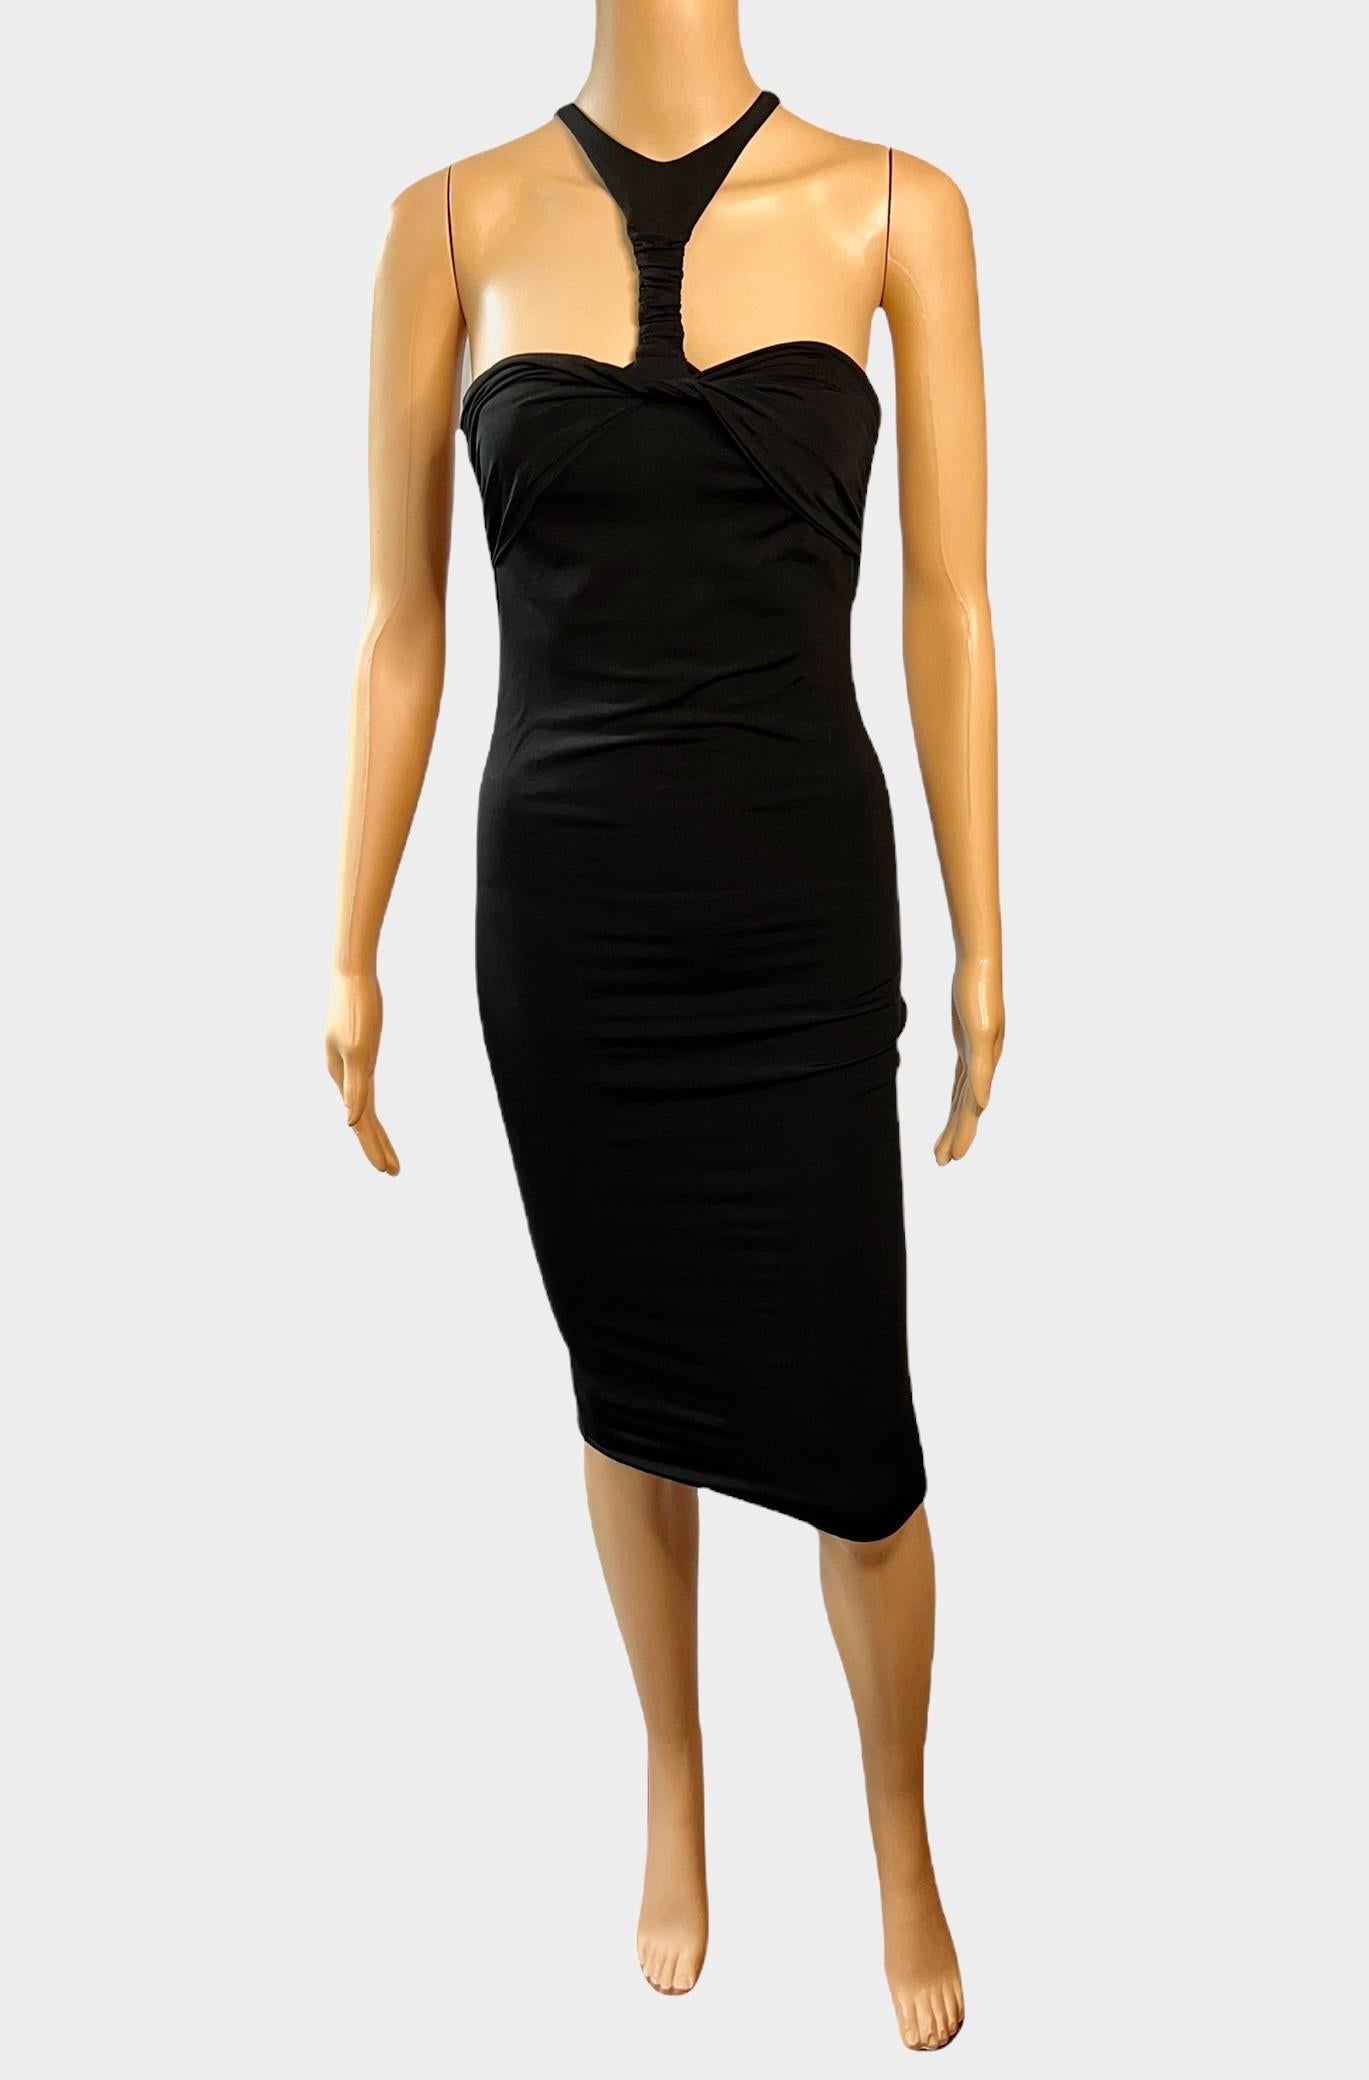 Tom Ford for Gucci F/W 2004 Unworn Plunging Cutout Black Evening Dress  In Excellent Condition In Naples, FL